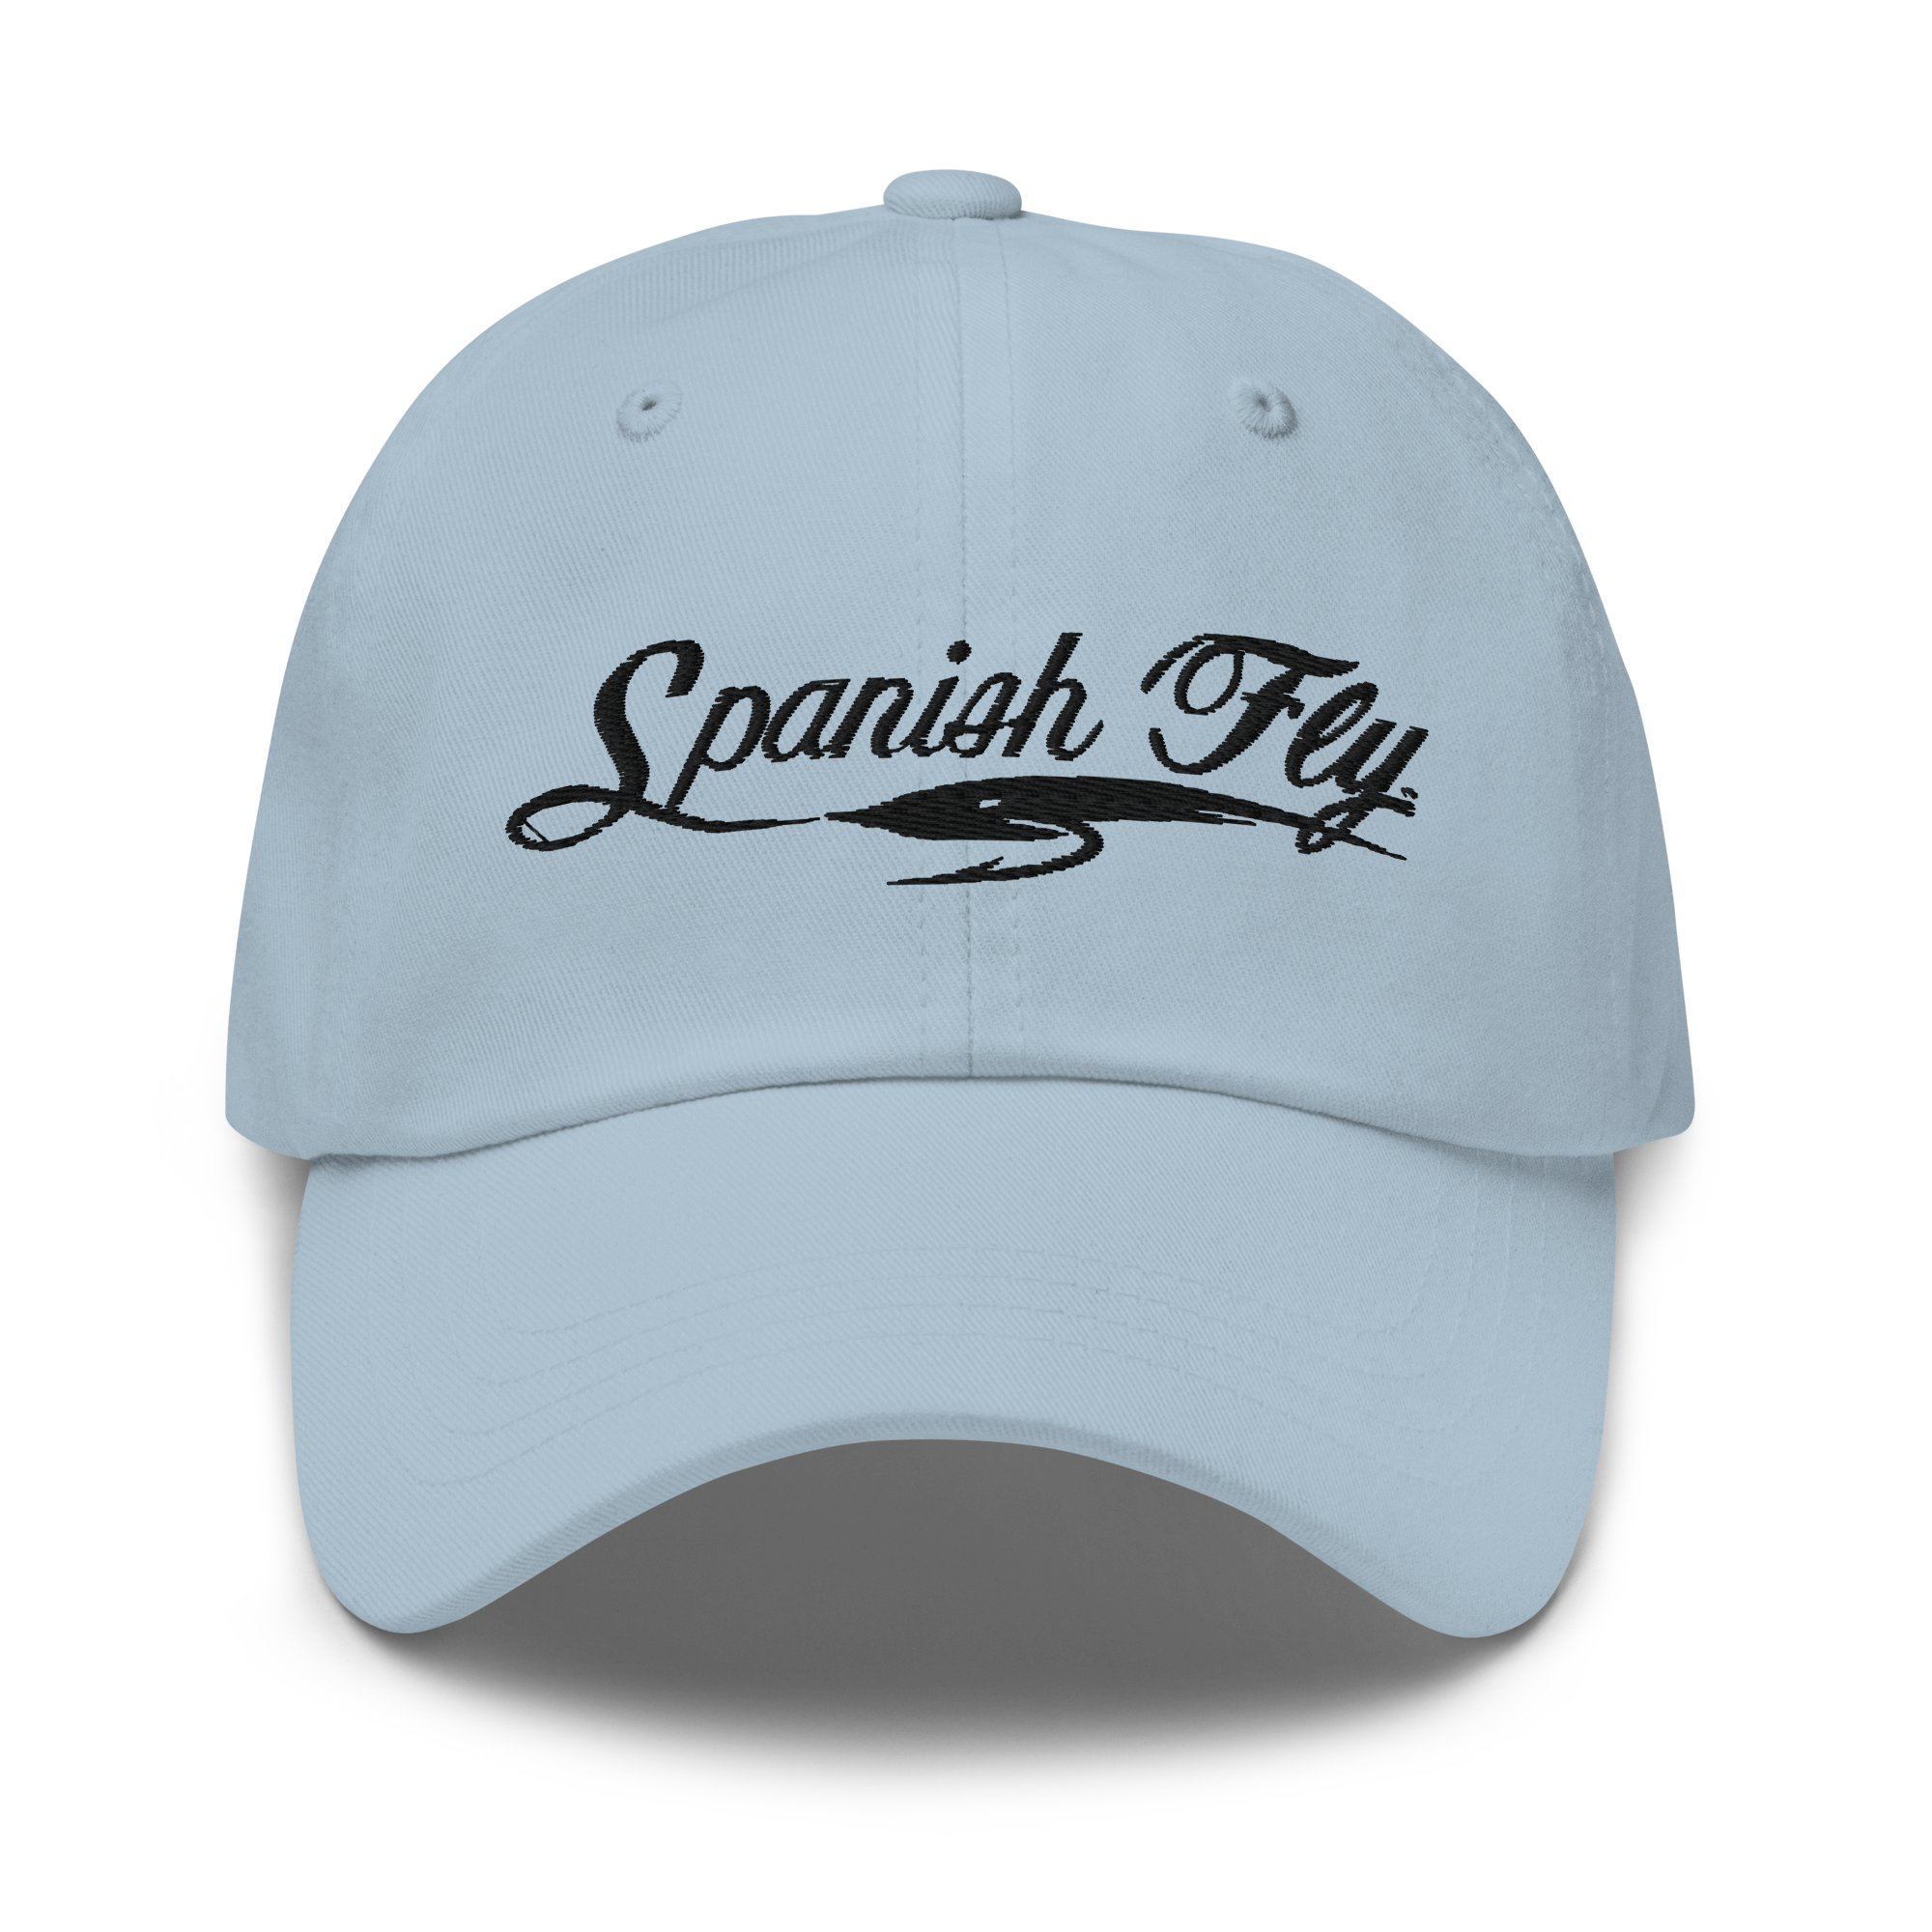 classic-dad-hat-light-blue-front-6516f8f936e4e_30c902e3-2f67-4eaa-963e-012a21800ddb.png